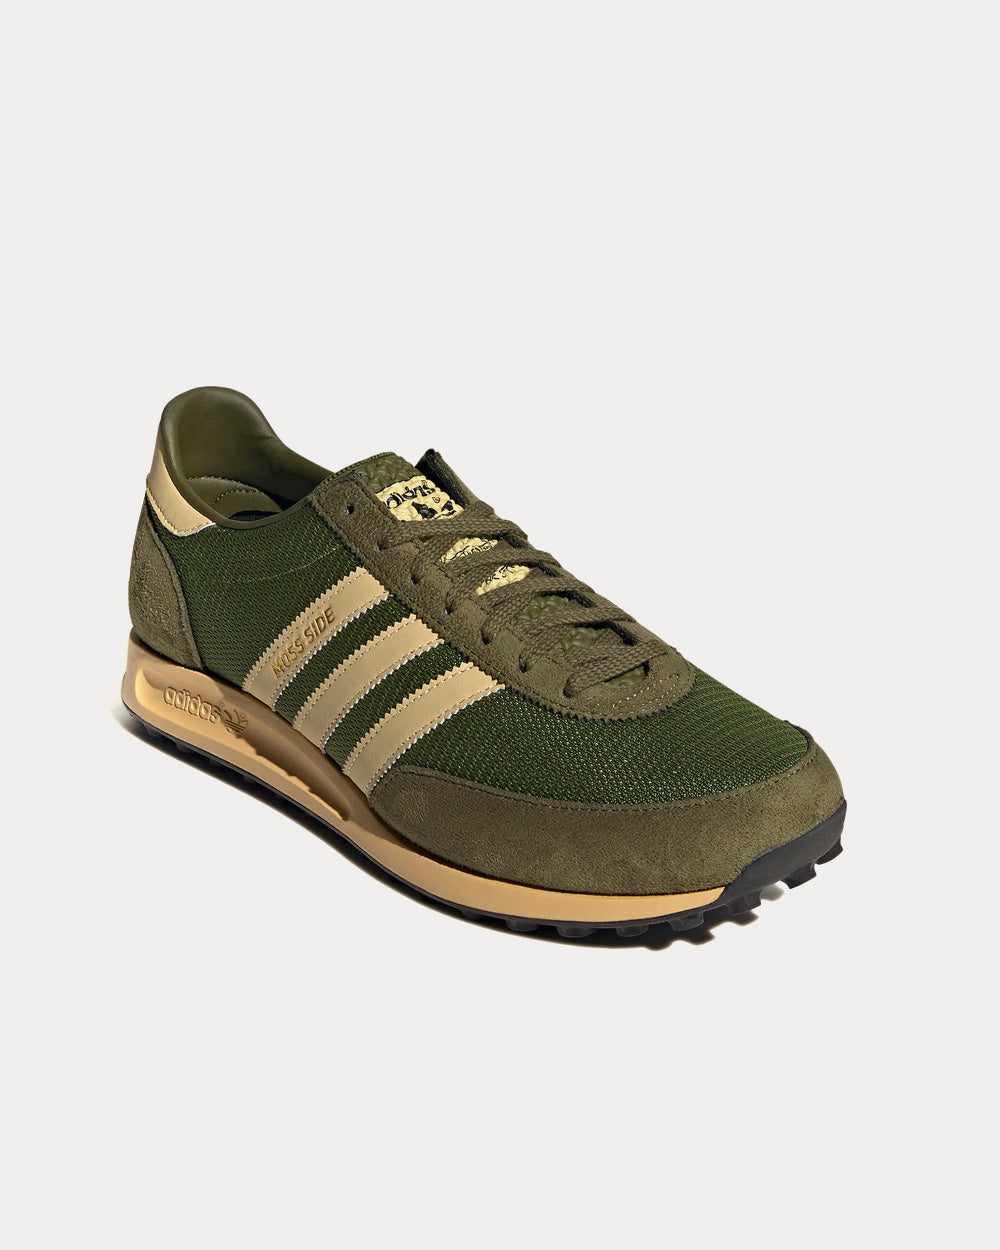 Adidas - Moss Side Dust Green / Sand / Craft Green Low Top Sneakers